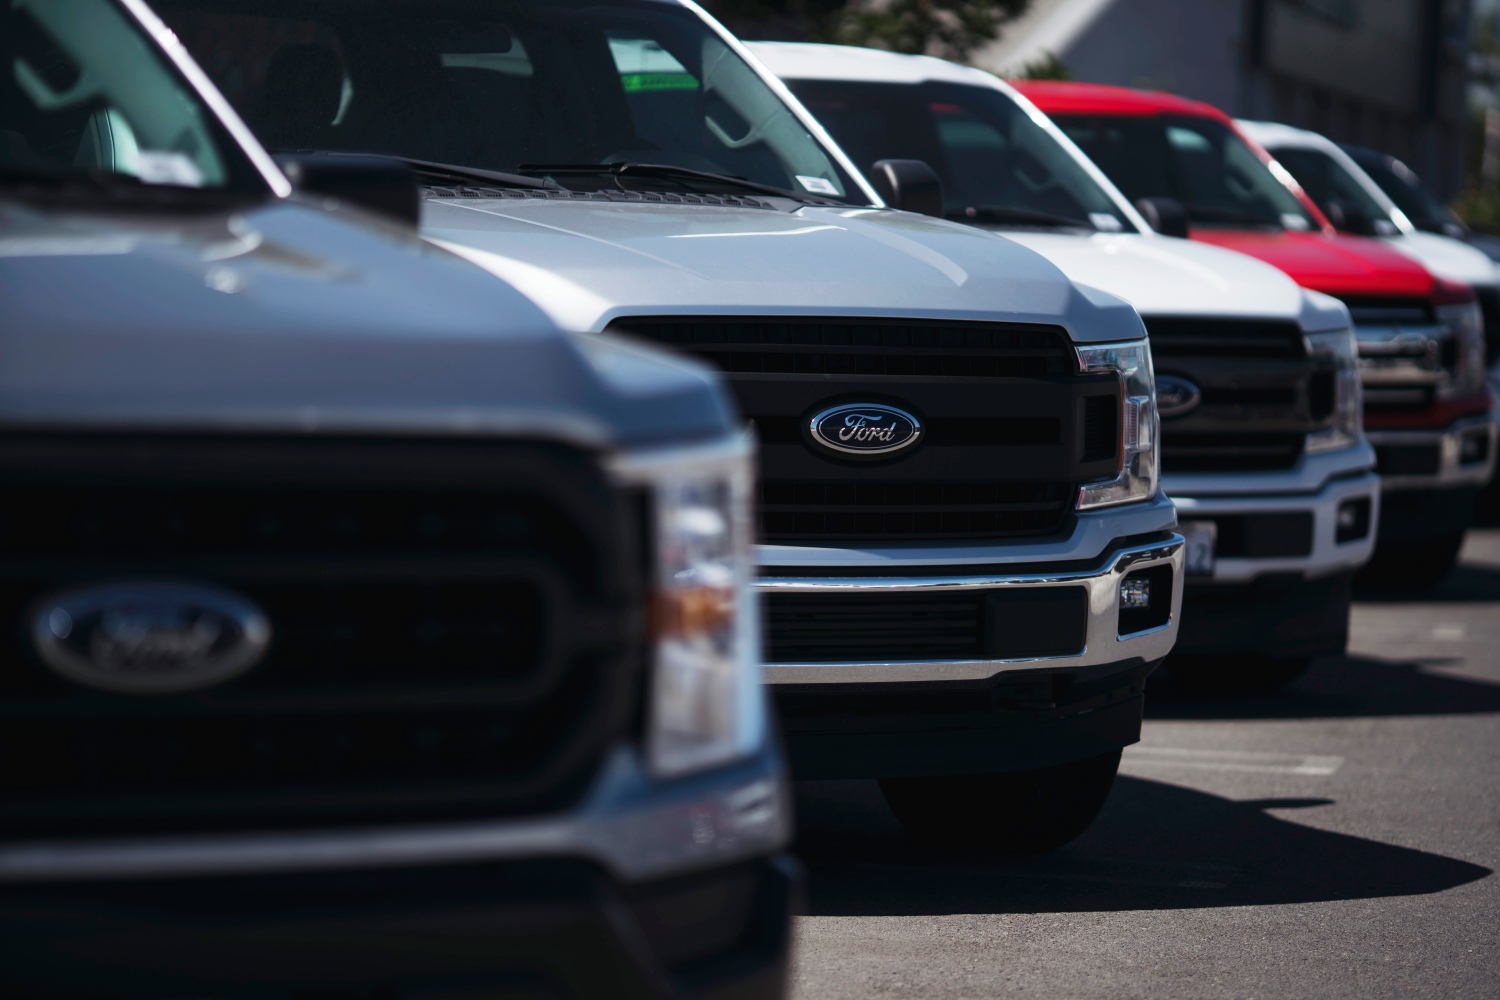 Vehicles buyers want the most are pickup trucks and SUVs